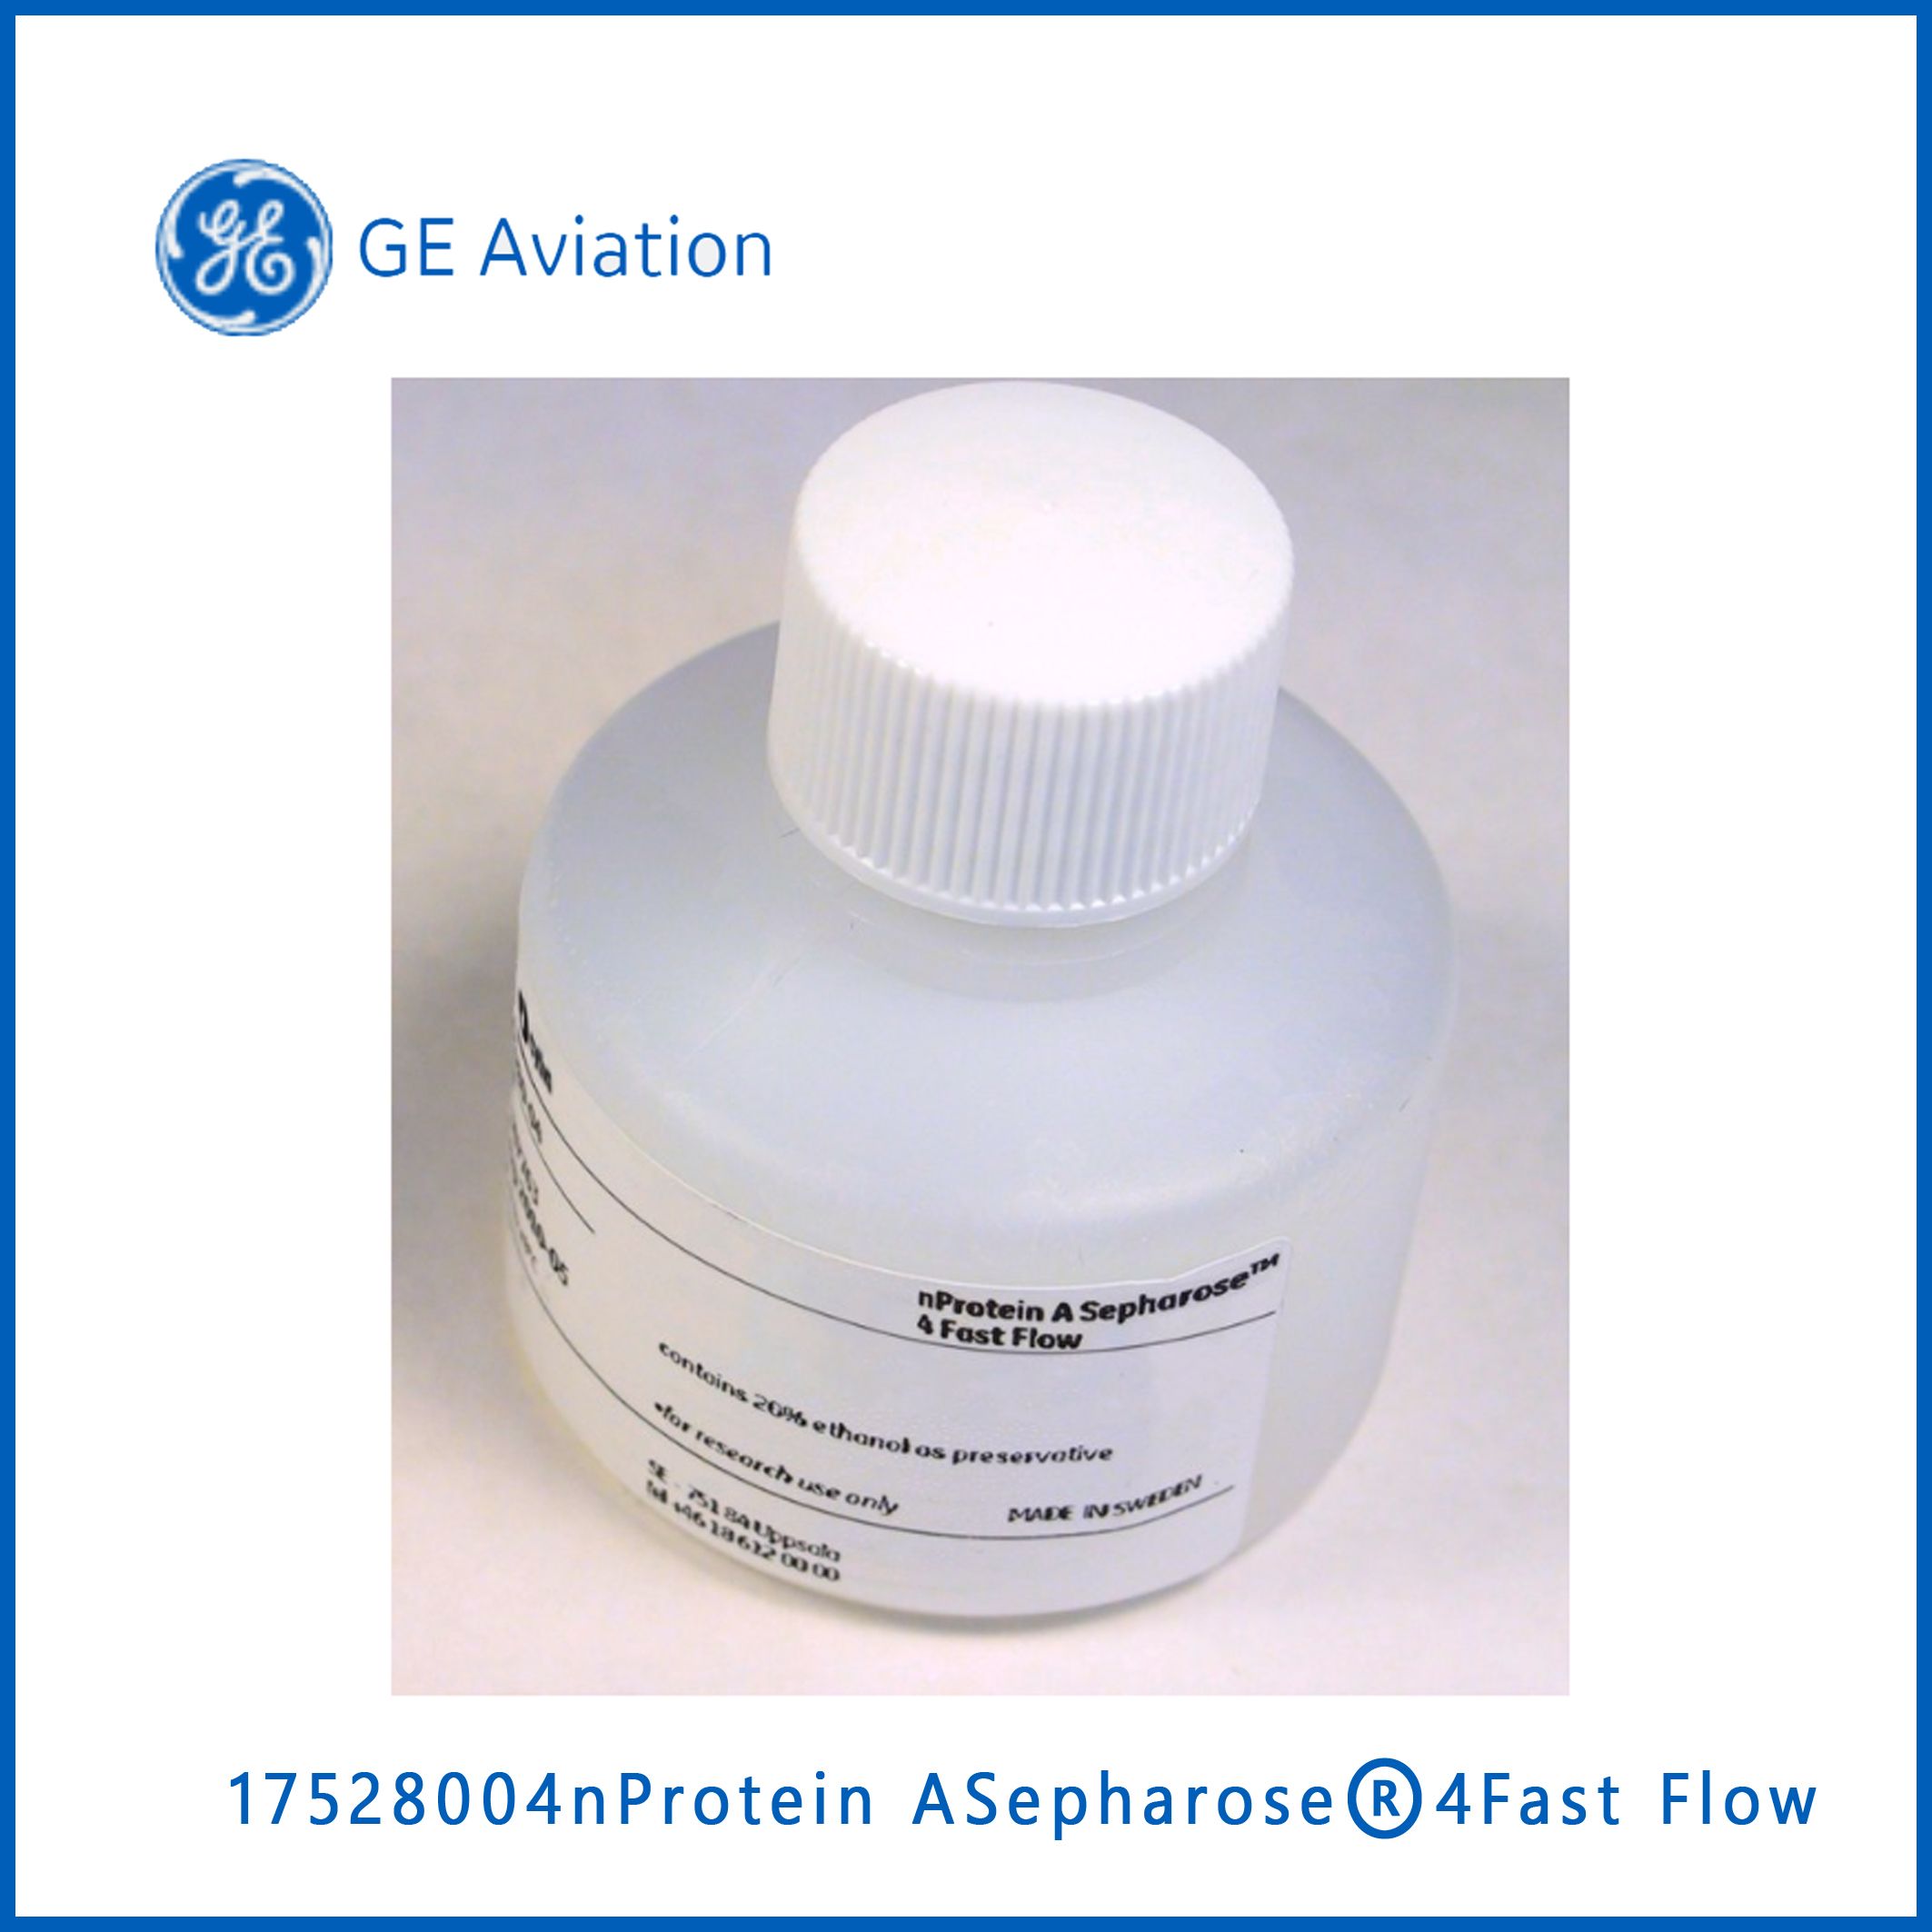 GE17528004nProtein A Sepharose® 4 Fast Flow, 25Ml, Protein A填料,现货